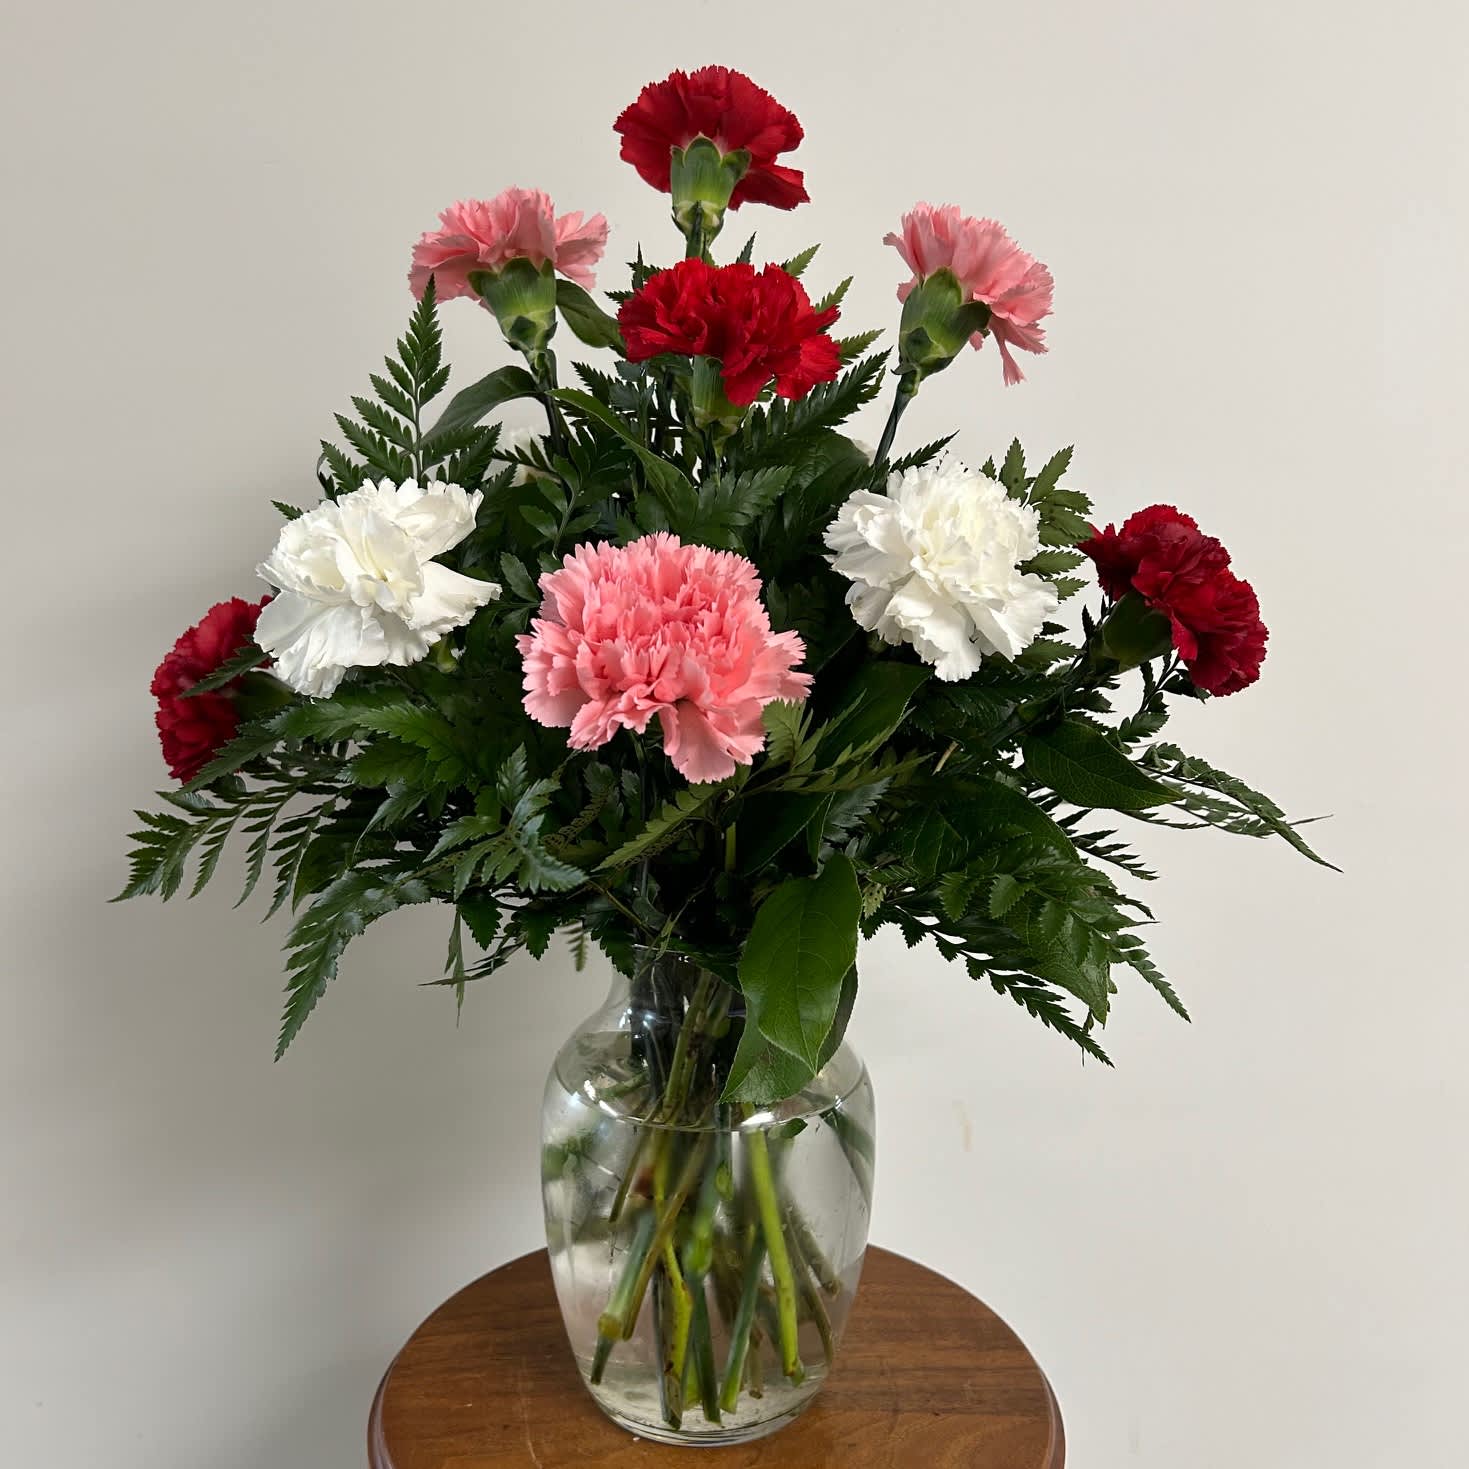 12 Carnations Assorted colors - Sweetly fragrant, this simple arrangement is sure to charm!   A dozen ASSORTED carnations arrive professionally arranged in a clear sweetheart glass vase.  A MIX OF VALENTINE COLORS WILL BE USED FOR VALENTINE'S DAY.